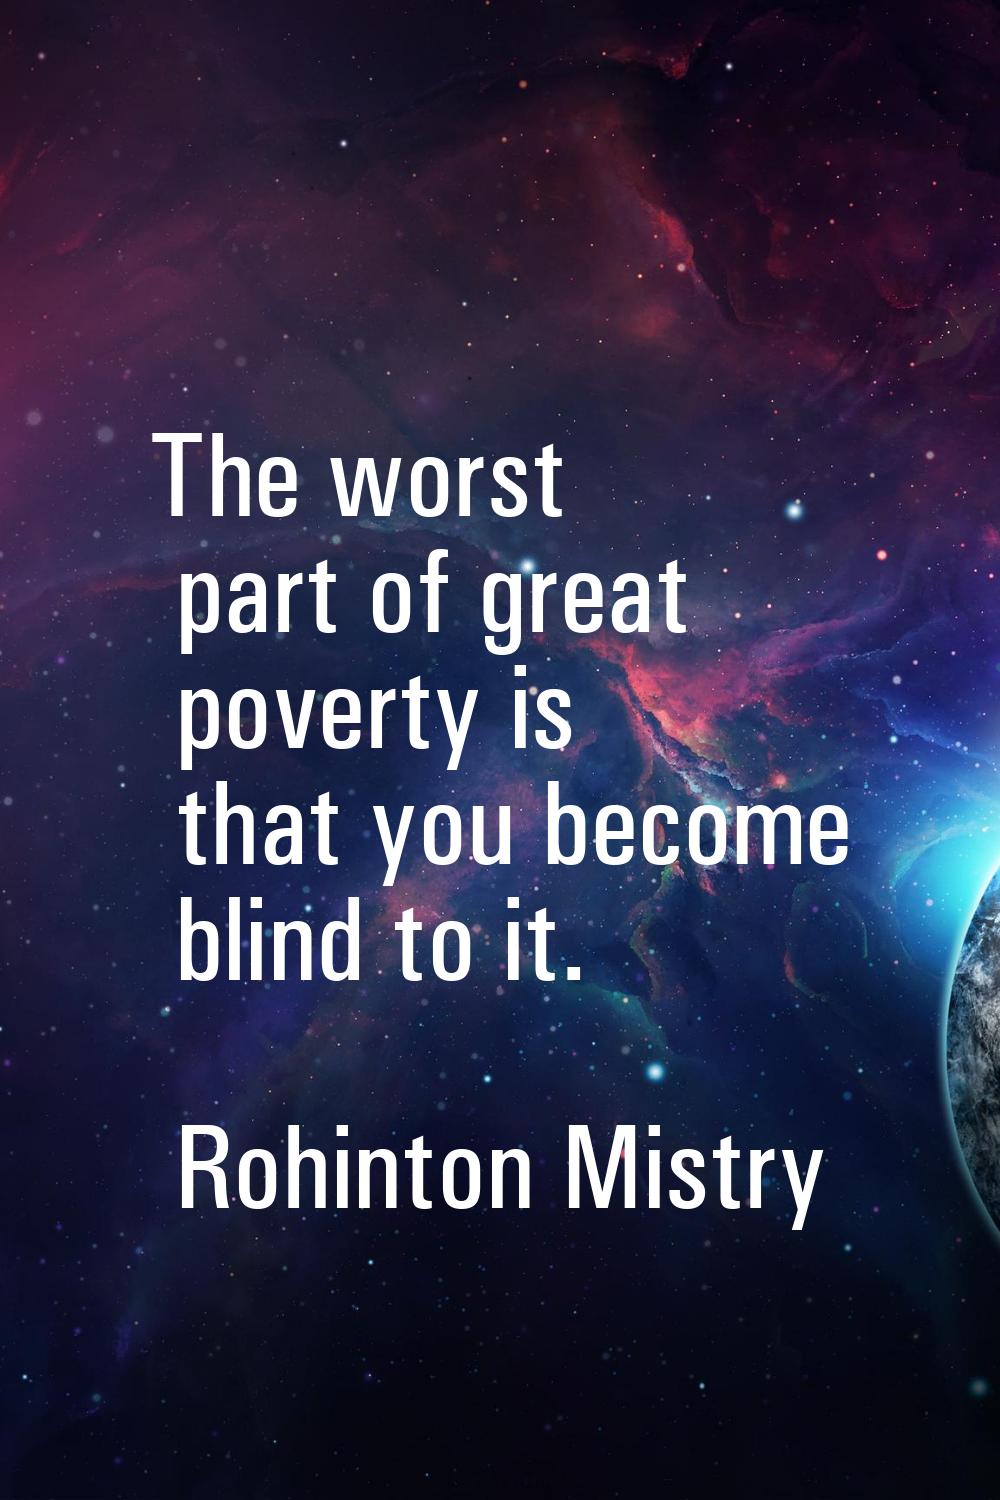 The worst part of great poverty is that you become blind to it.